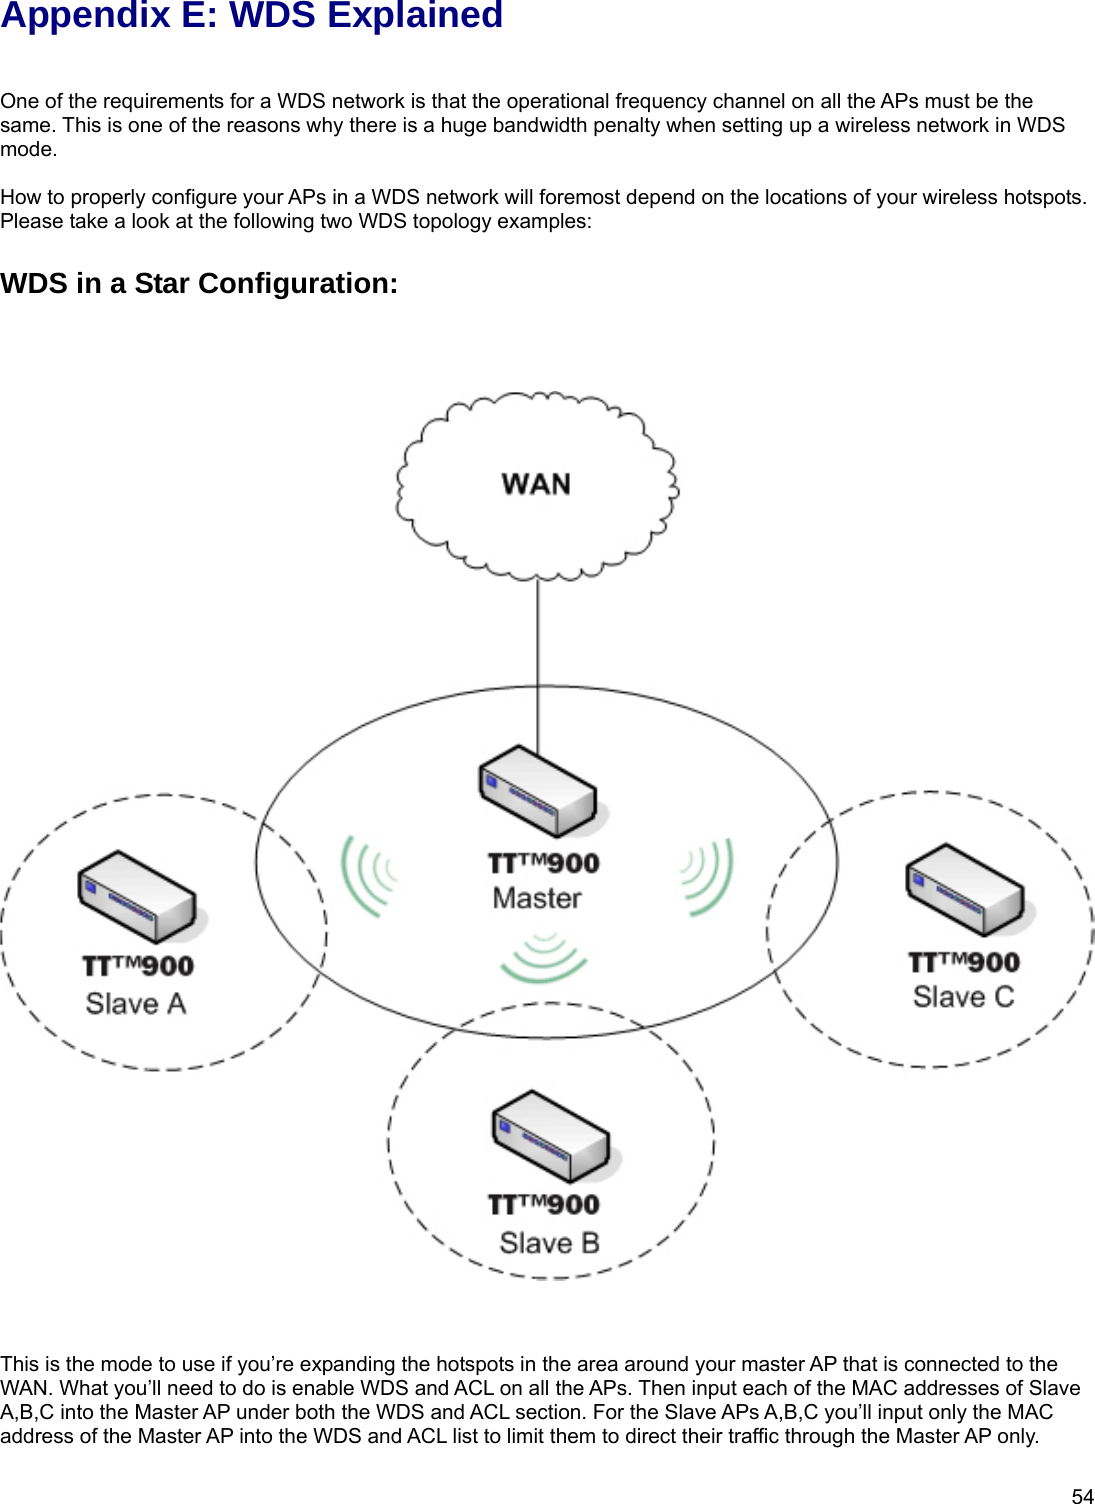  54Appendix E: WDS Explained   One of the requirements for a WDS network is that the operational frequency channel on all the APs must be the same. This is one of the reasons why there is a huge bandwidth penalty when setting up a wireless network in WDS mode.  How to properly configure your APs in a WDS network will foremost depend on the locations of your wireless hotspots. Please take a look at the following two WDS topology examples:  WDS in a Star Configuration:        This is the mode to use if you’re expanding the hotspots in the area around your master AP that is connected to the WAN. What you’ll need to do is enable WDS and ACL on all the APs. Then input each of the MAC addresses of Slave A,B,C into the Master AP under both the WDS and ACL section. For the Slave APs A,B,C you’ll input only the MAC address of the Master AP into the WDS and ACL list to limit them to direct their traffic through the Master AP only.  